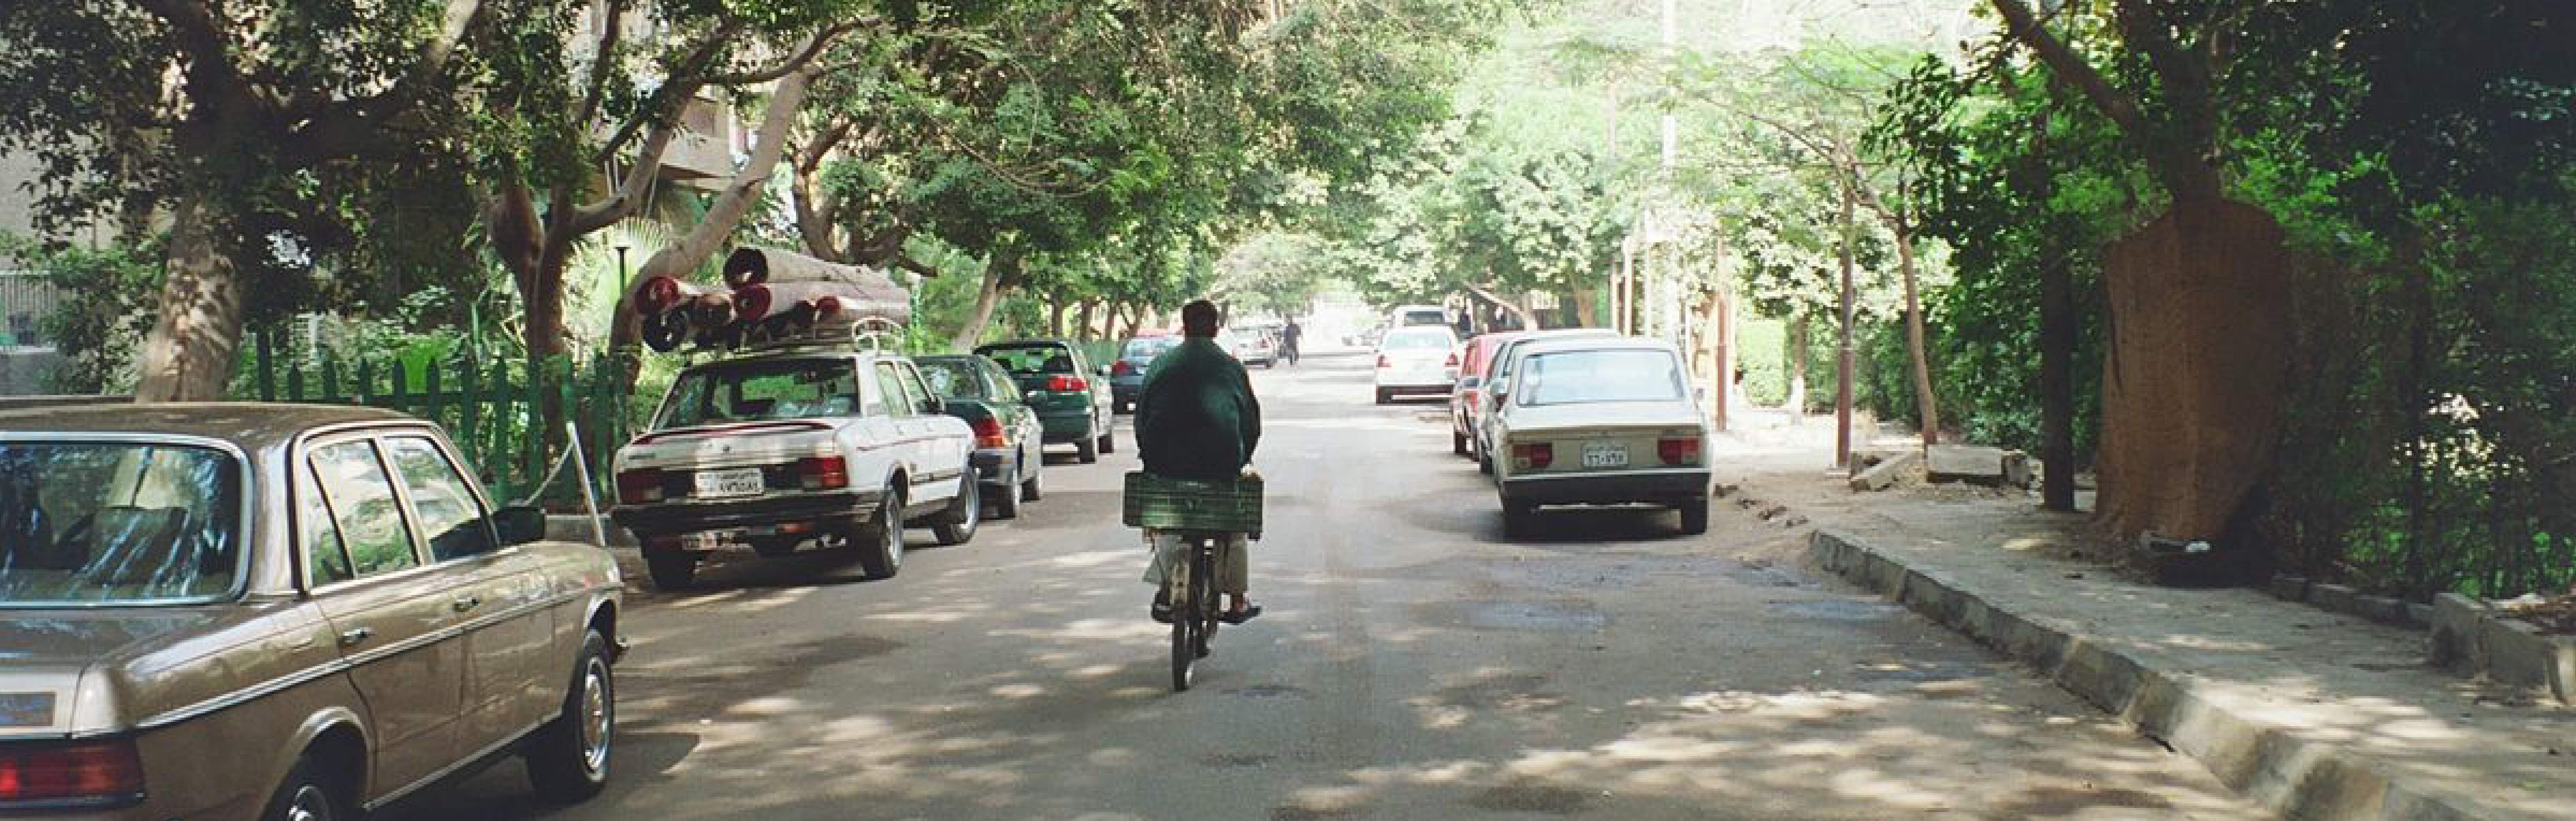 6 Reasons Why Maadi Is a Wonderful Place to Live In